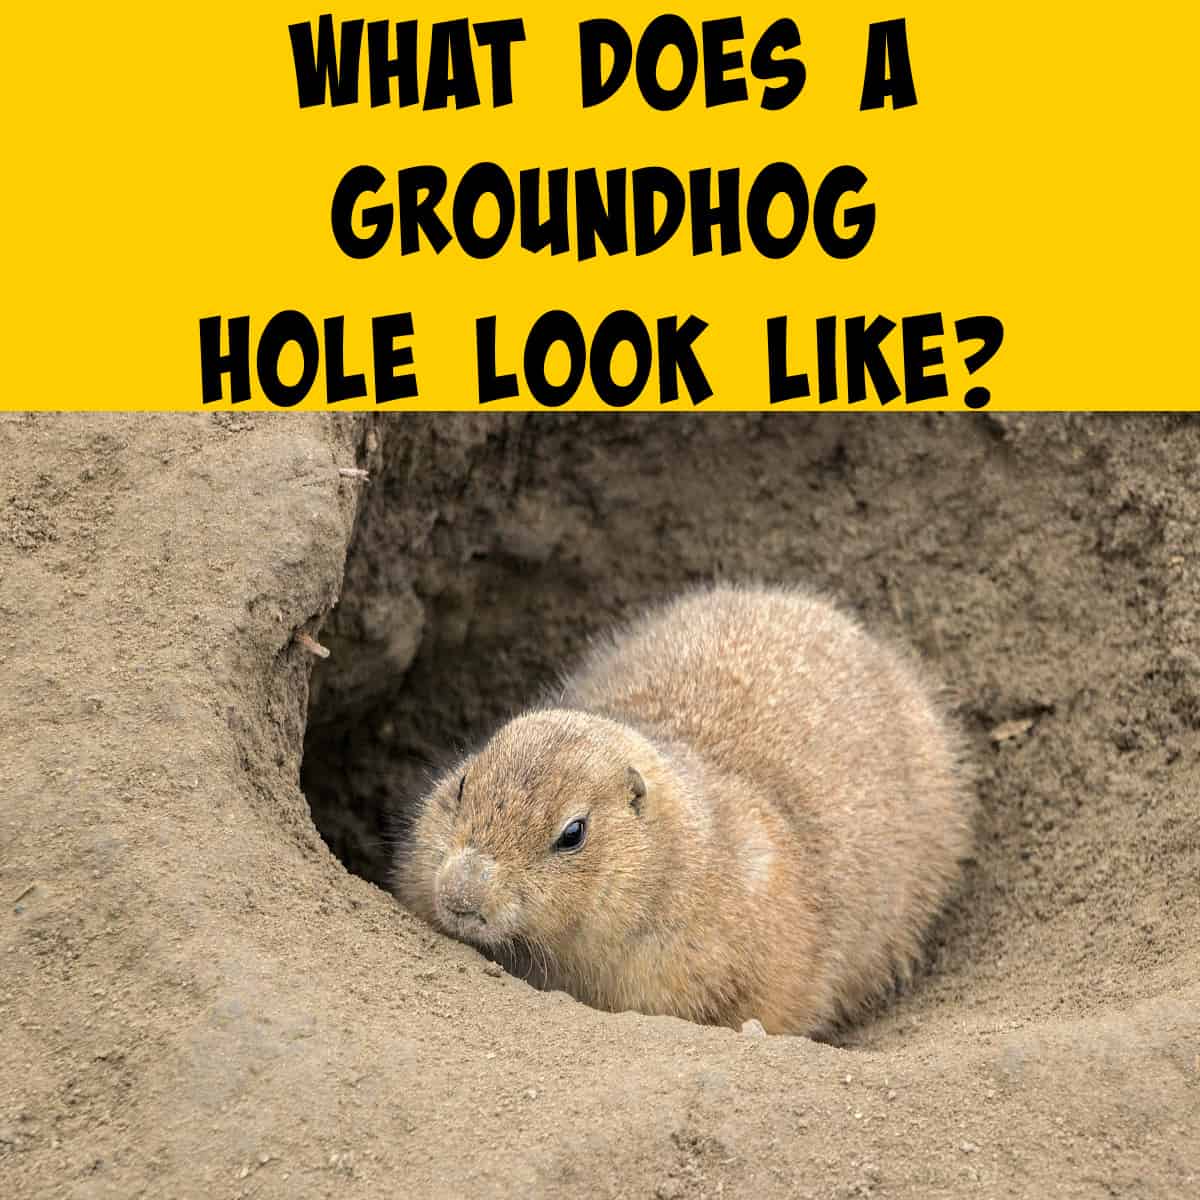 Groundhog sitting in its hole